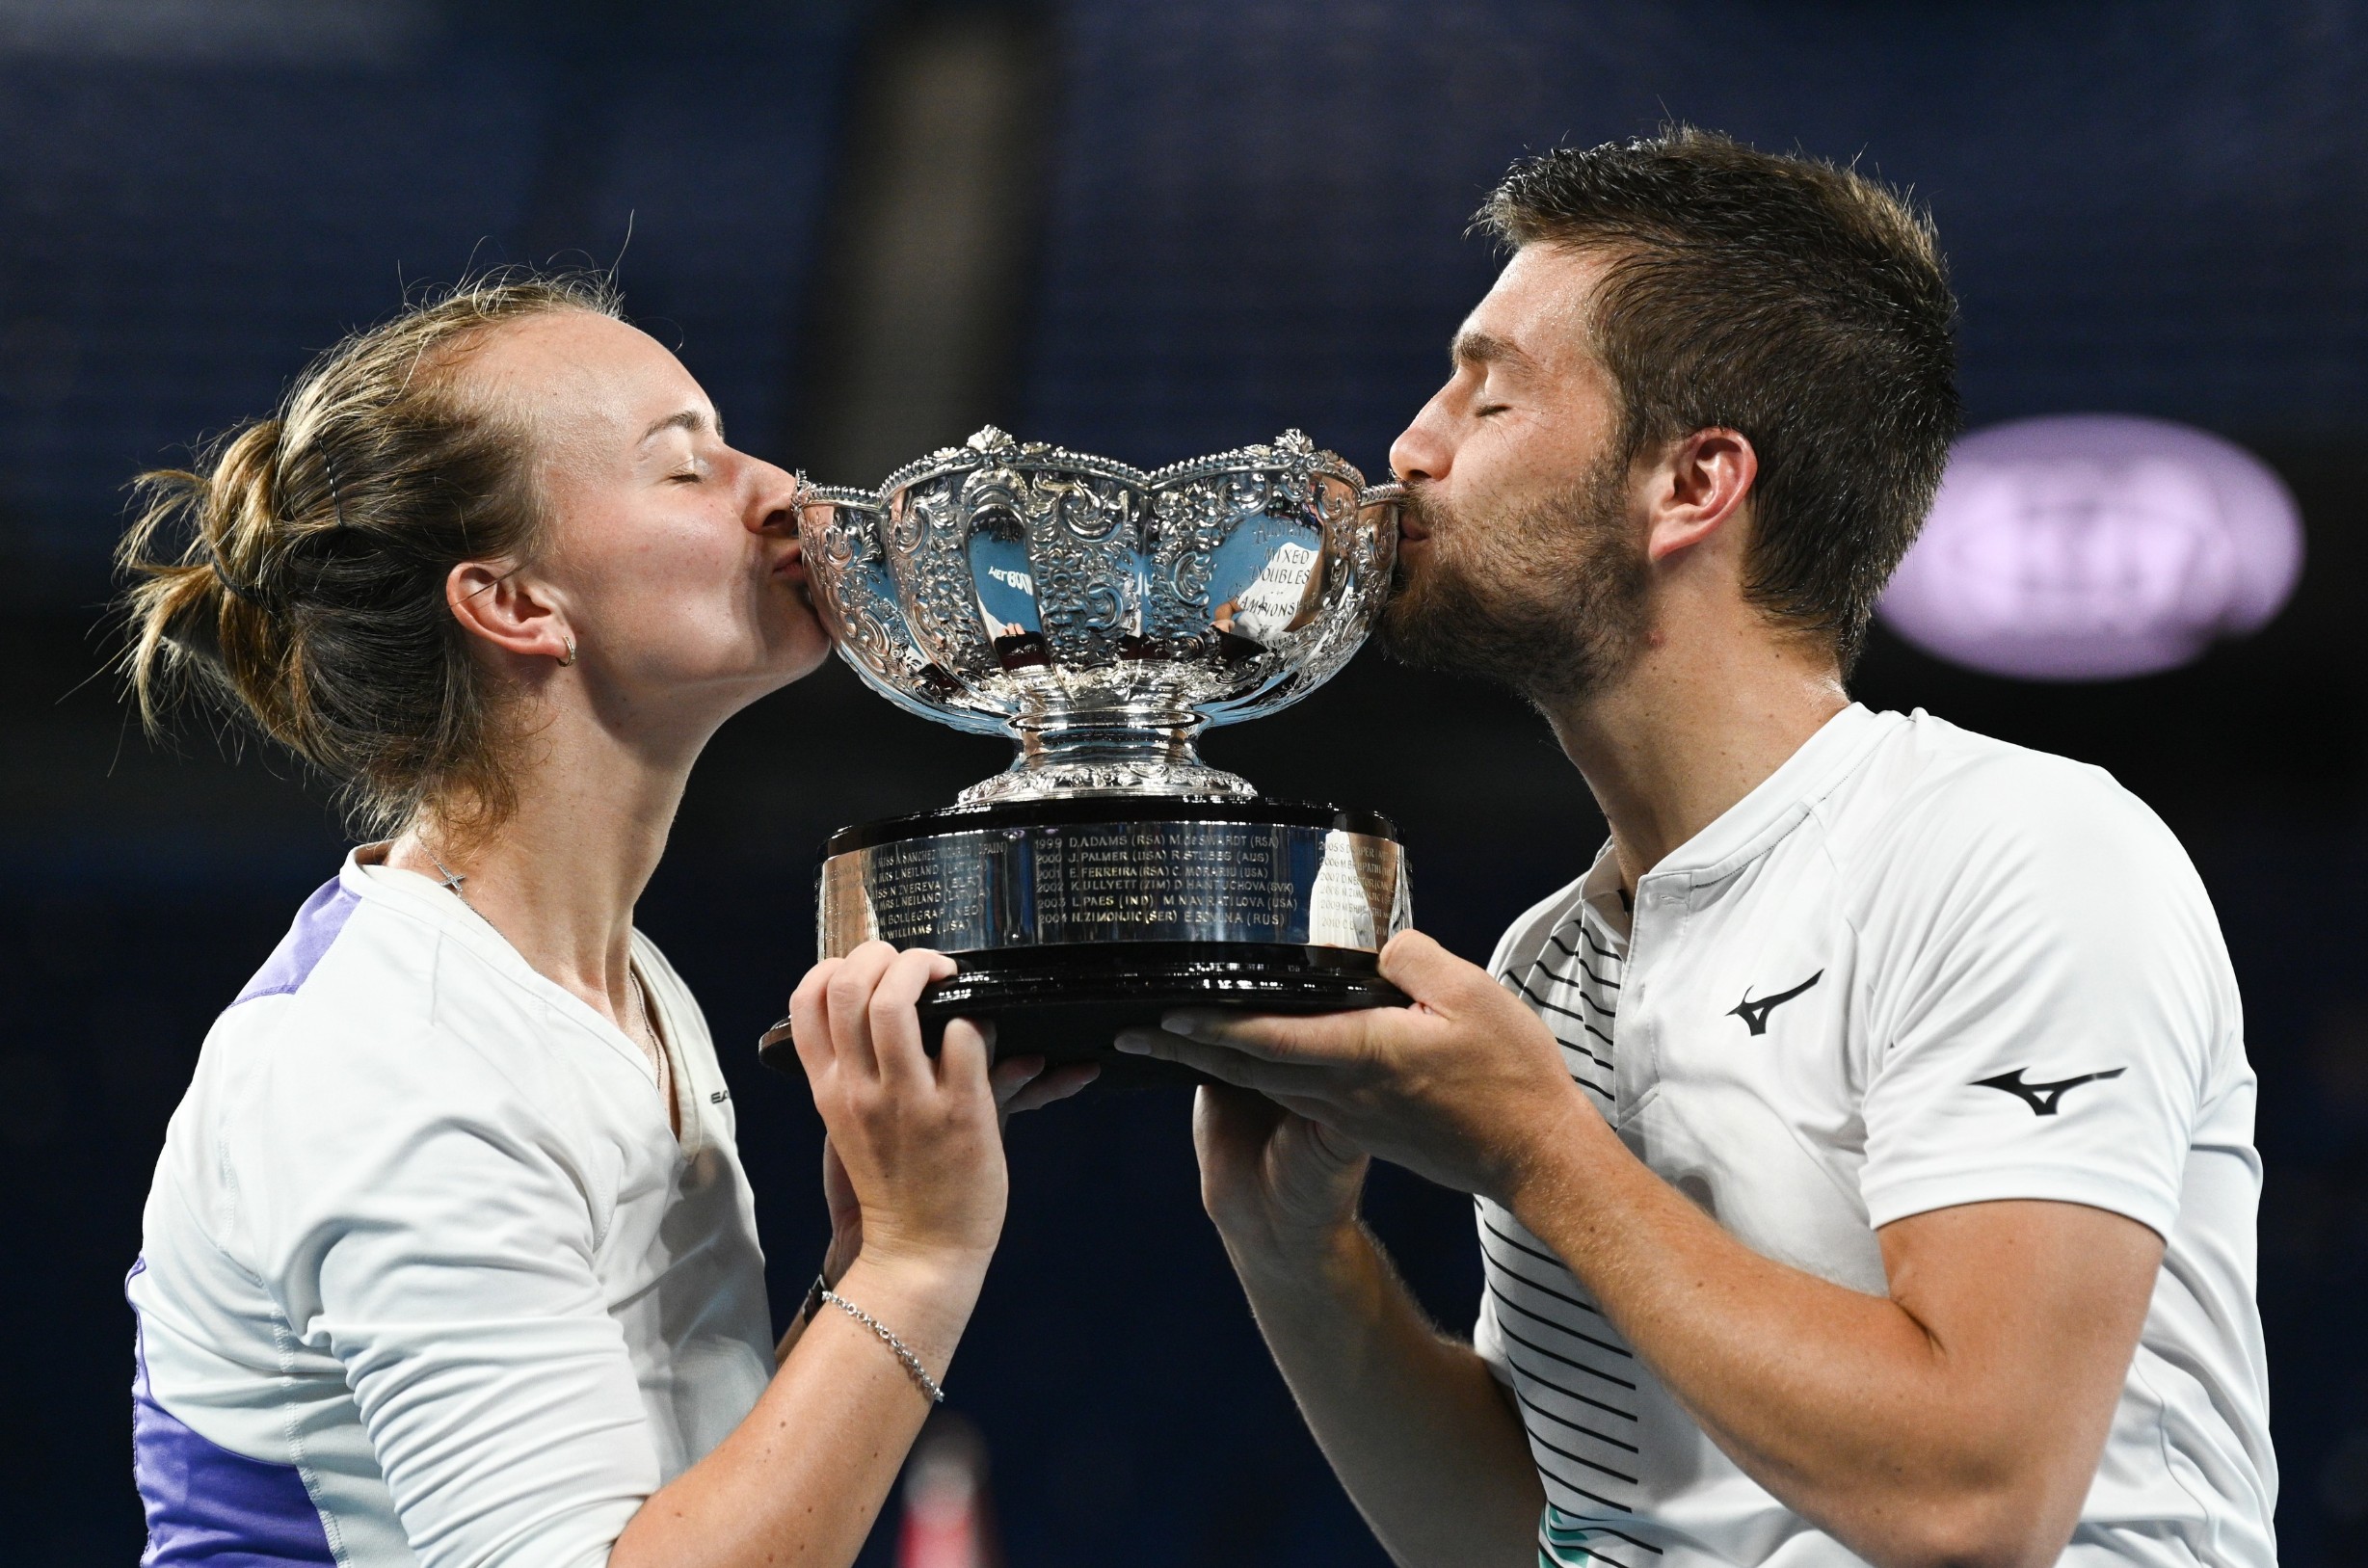 Nikola Mektic and Barbora Krejcikova pose with the Trophy after winning the Mixed Doubles Final
Australian Open Tennis, Day Thirteen, Melbourne Park, Australia - 01 Feb 2020, Image: 495927446, License: Rights-managed, Restrictions: Editorial Use Only, Model Release: no, Credit line: James Gourley/BPI / Shutterstock Editorial / Profimedia